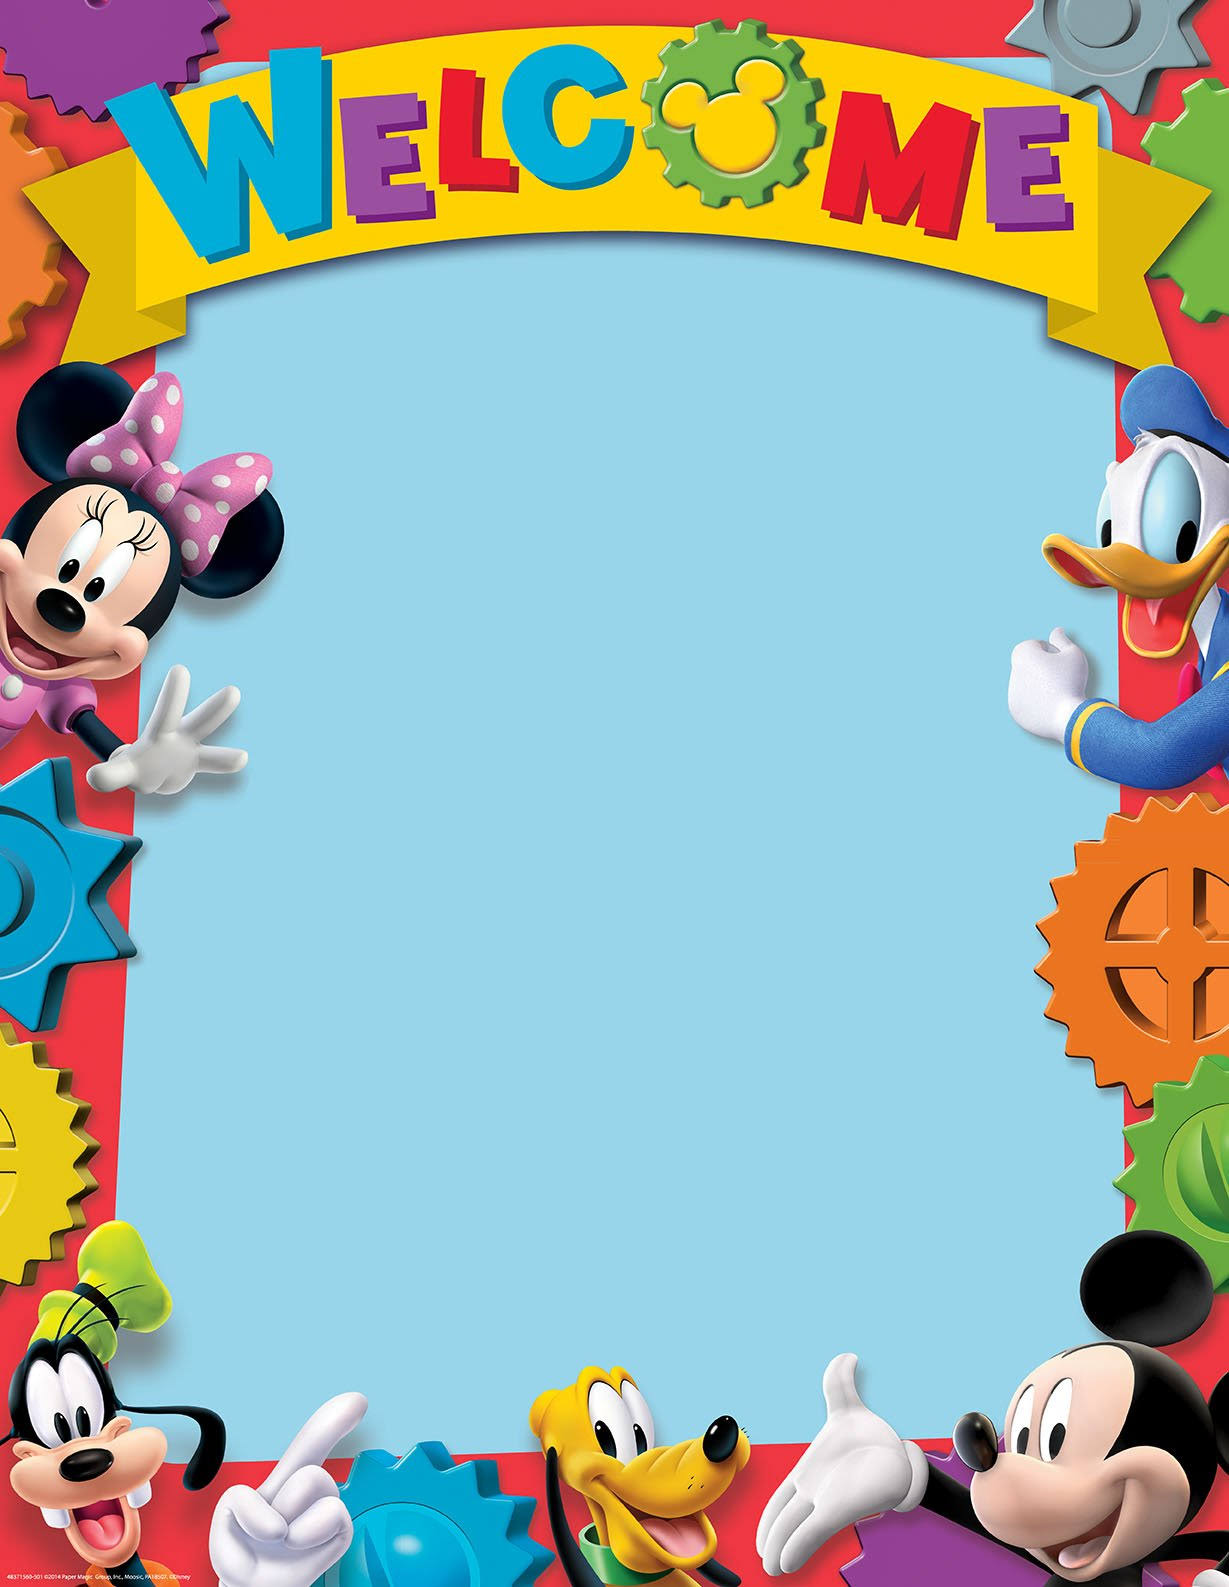 Eureka Mickey Mouse Clubhouse Welcome 17"x22" Charts (837156)